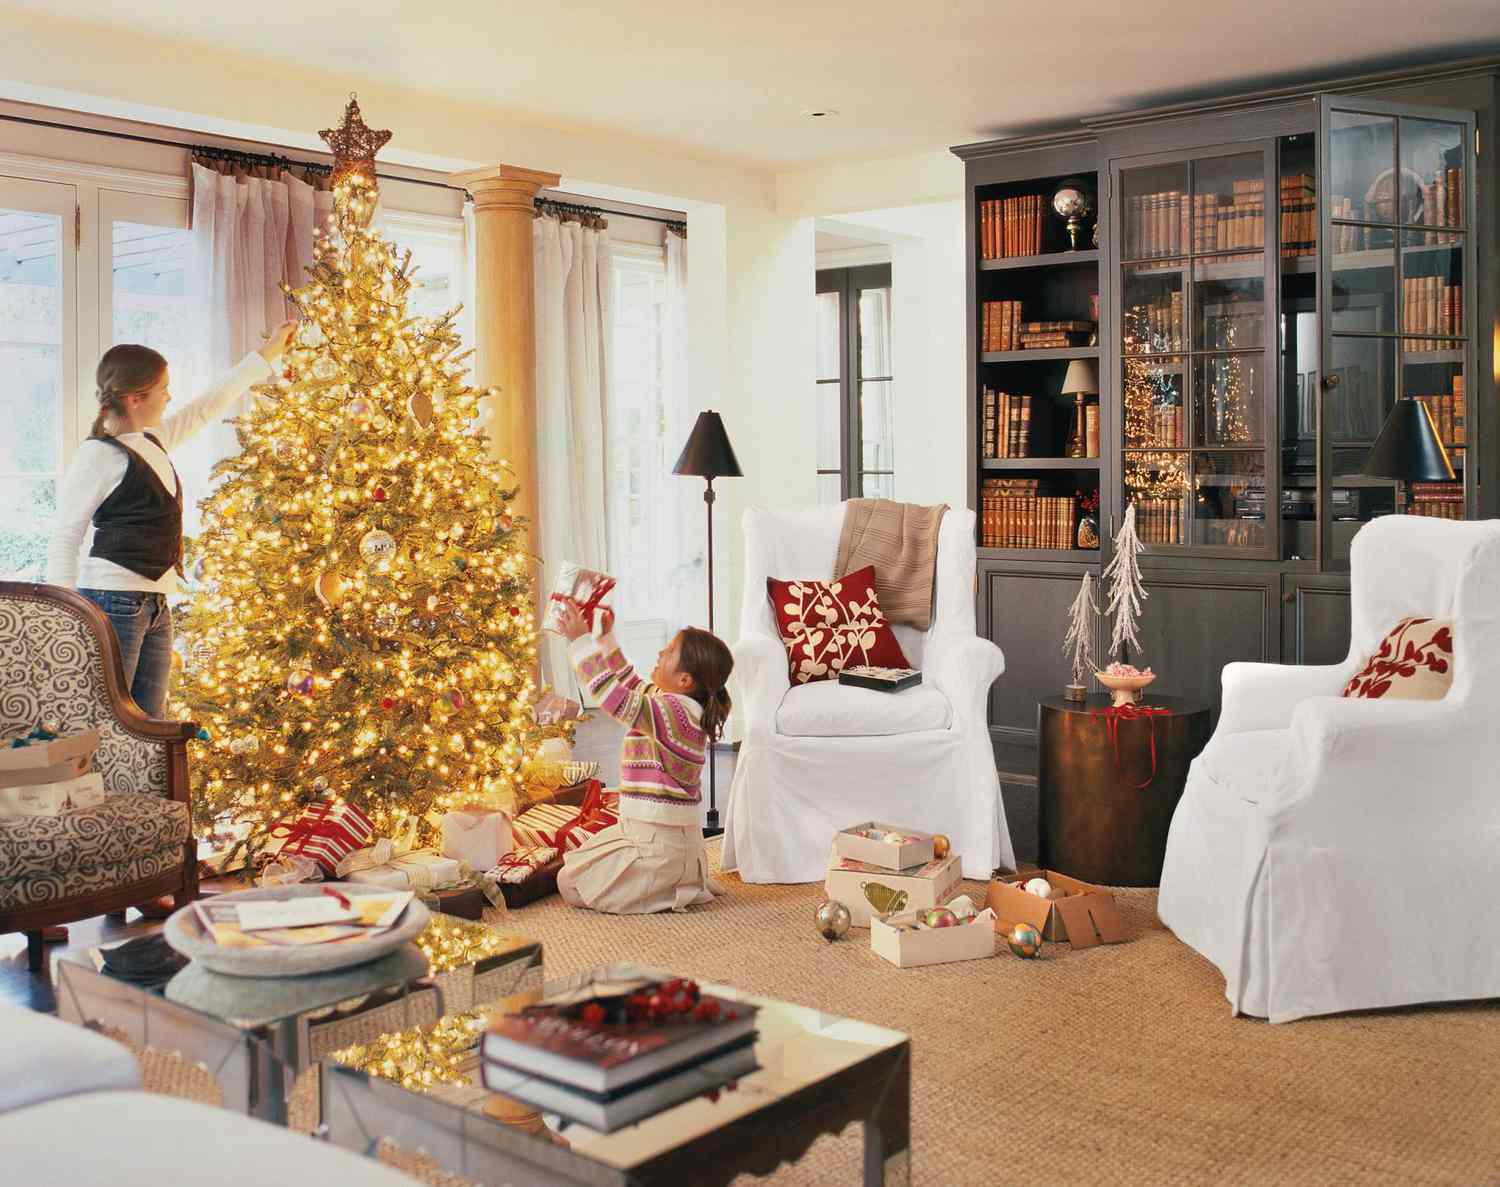 DIY Home Improvement: Transform Your Space With Holiday Freebies From Eat Drink Chic